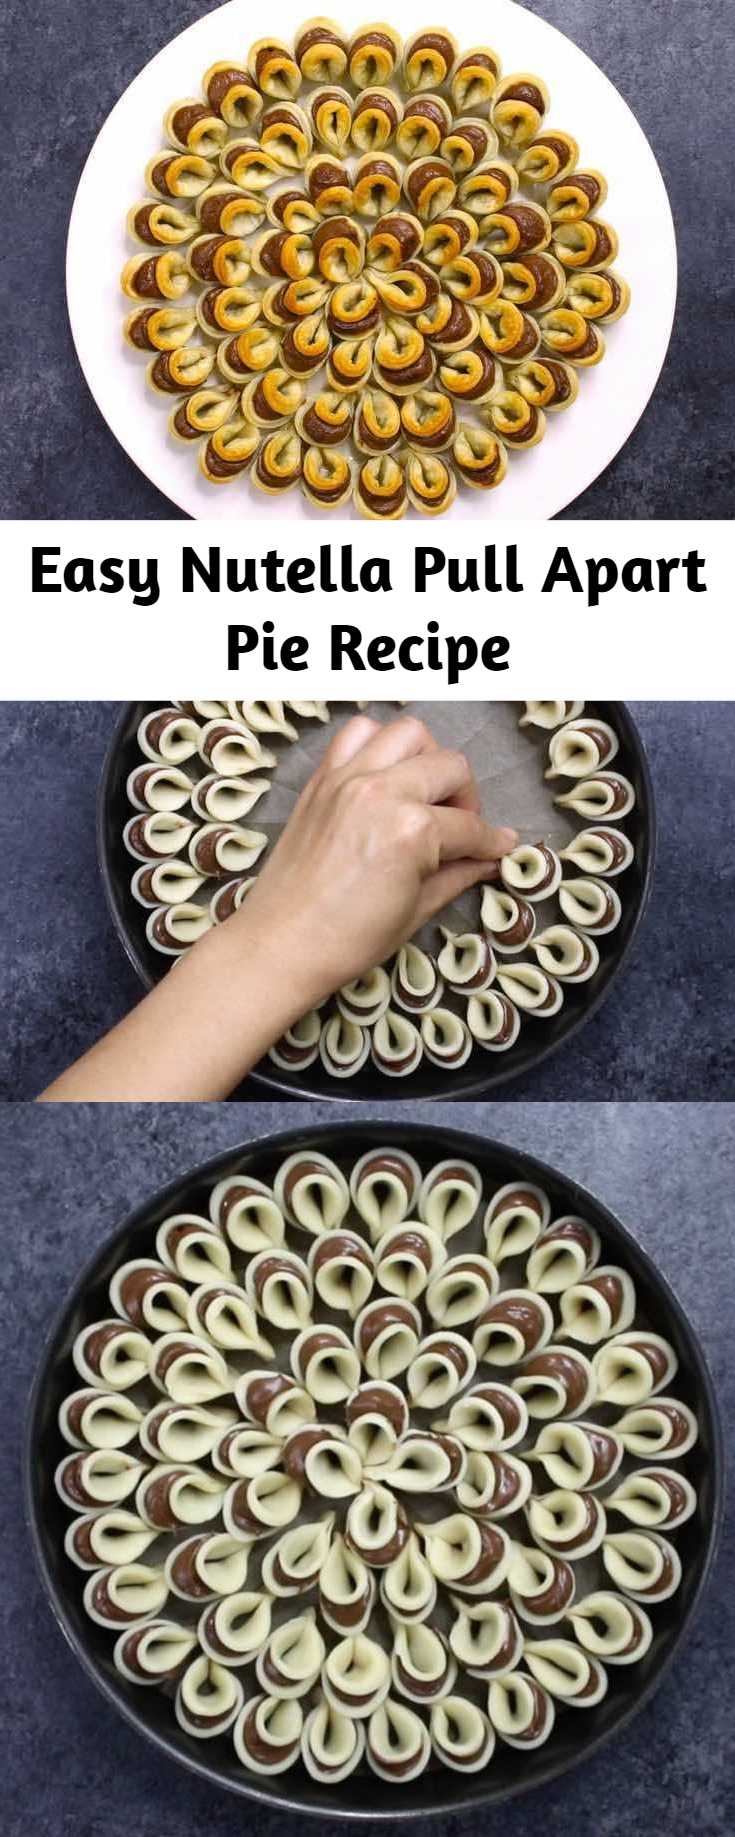 Easy Nutella Pull Apart Pie Recipe - Nutella Pie Pull Apart has mouthwatering morsels of flaky pastry with Nutella in between, all arranged in a gorgeous blossom pattern that's perfect for a party! Pull apart the bite-size pieces that will melt in your mouth. Make it with just 2 ingredients in about 30 minutes.